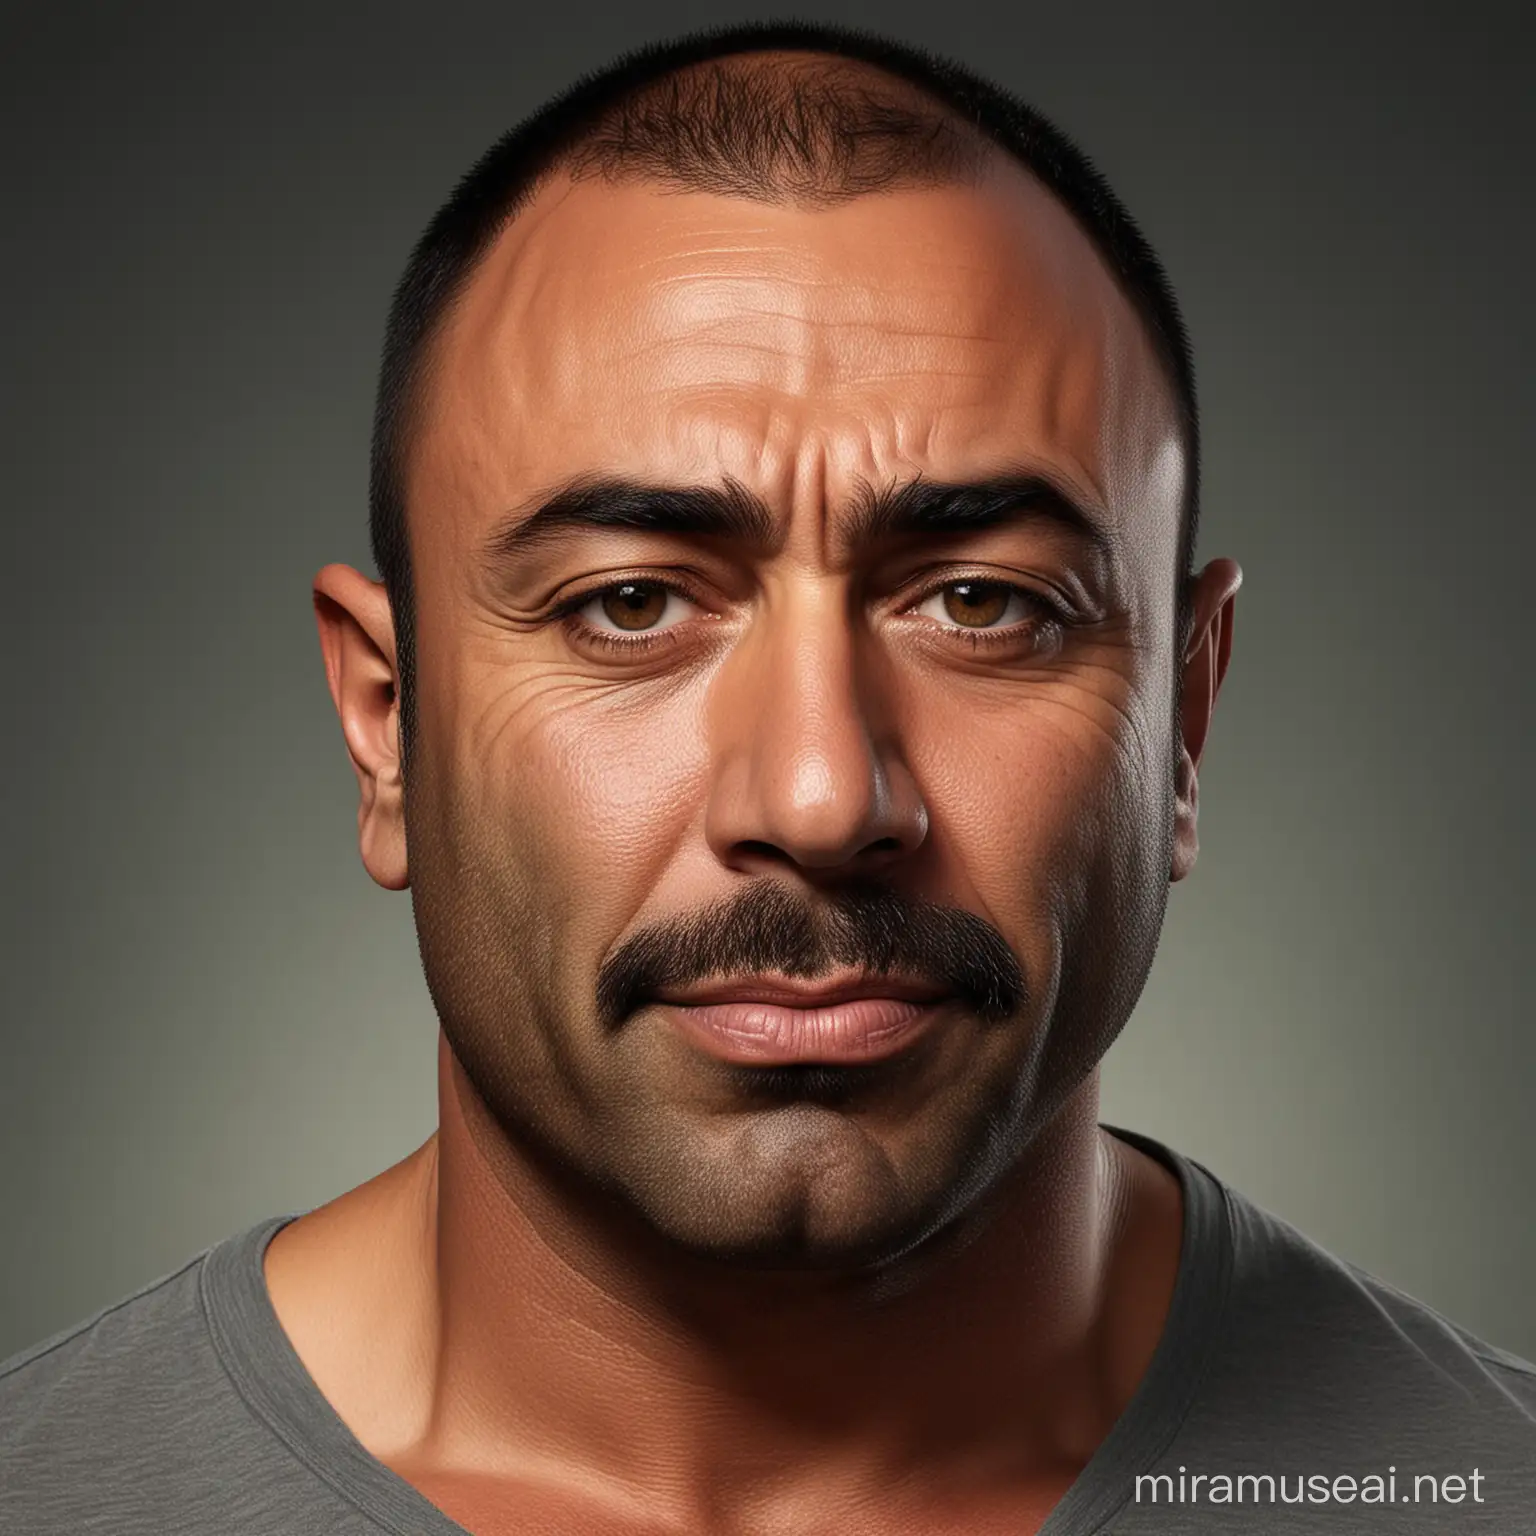 create joe rogan but make him look indian, with small moustache, make him look poor
